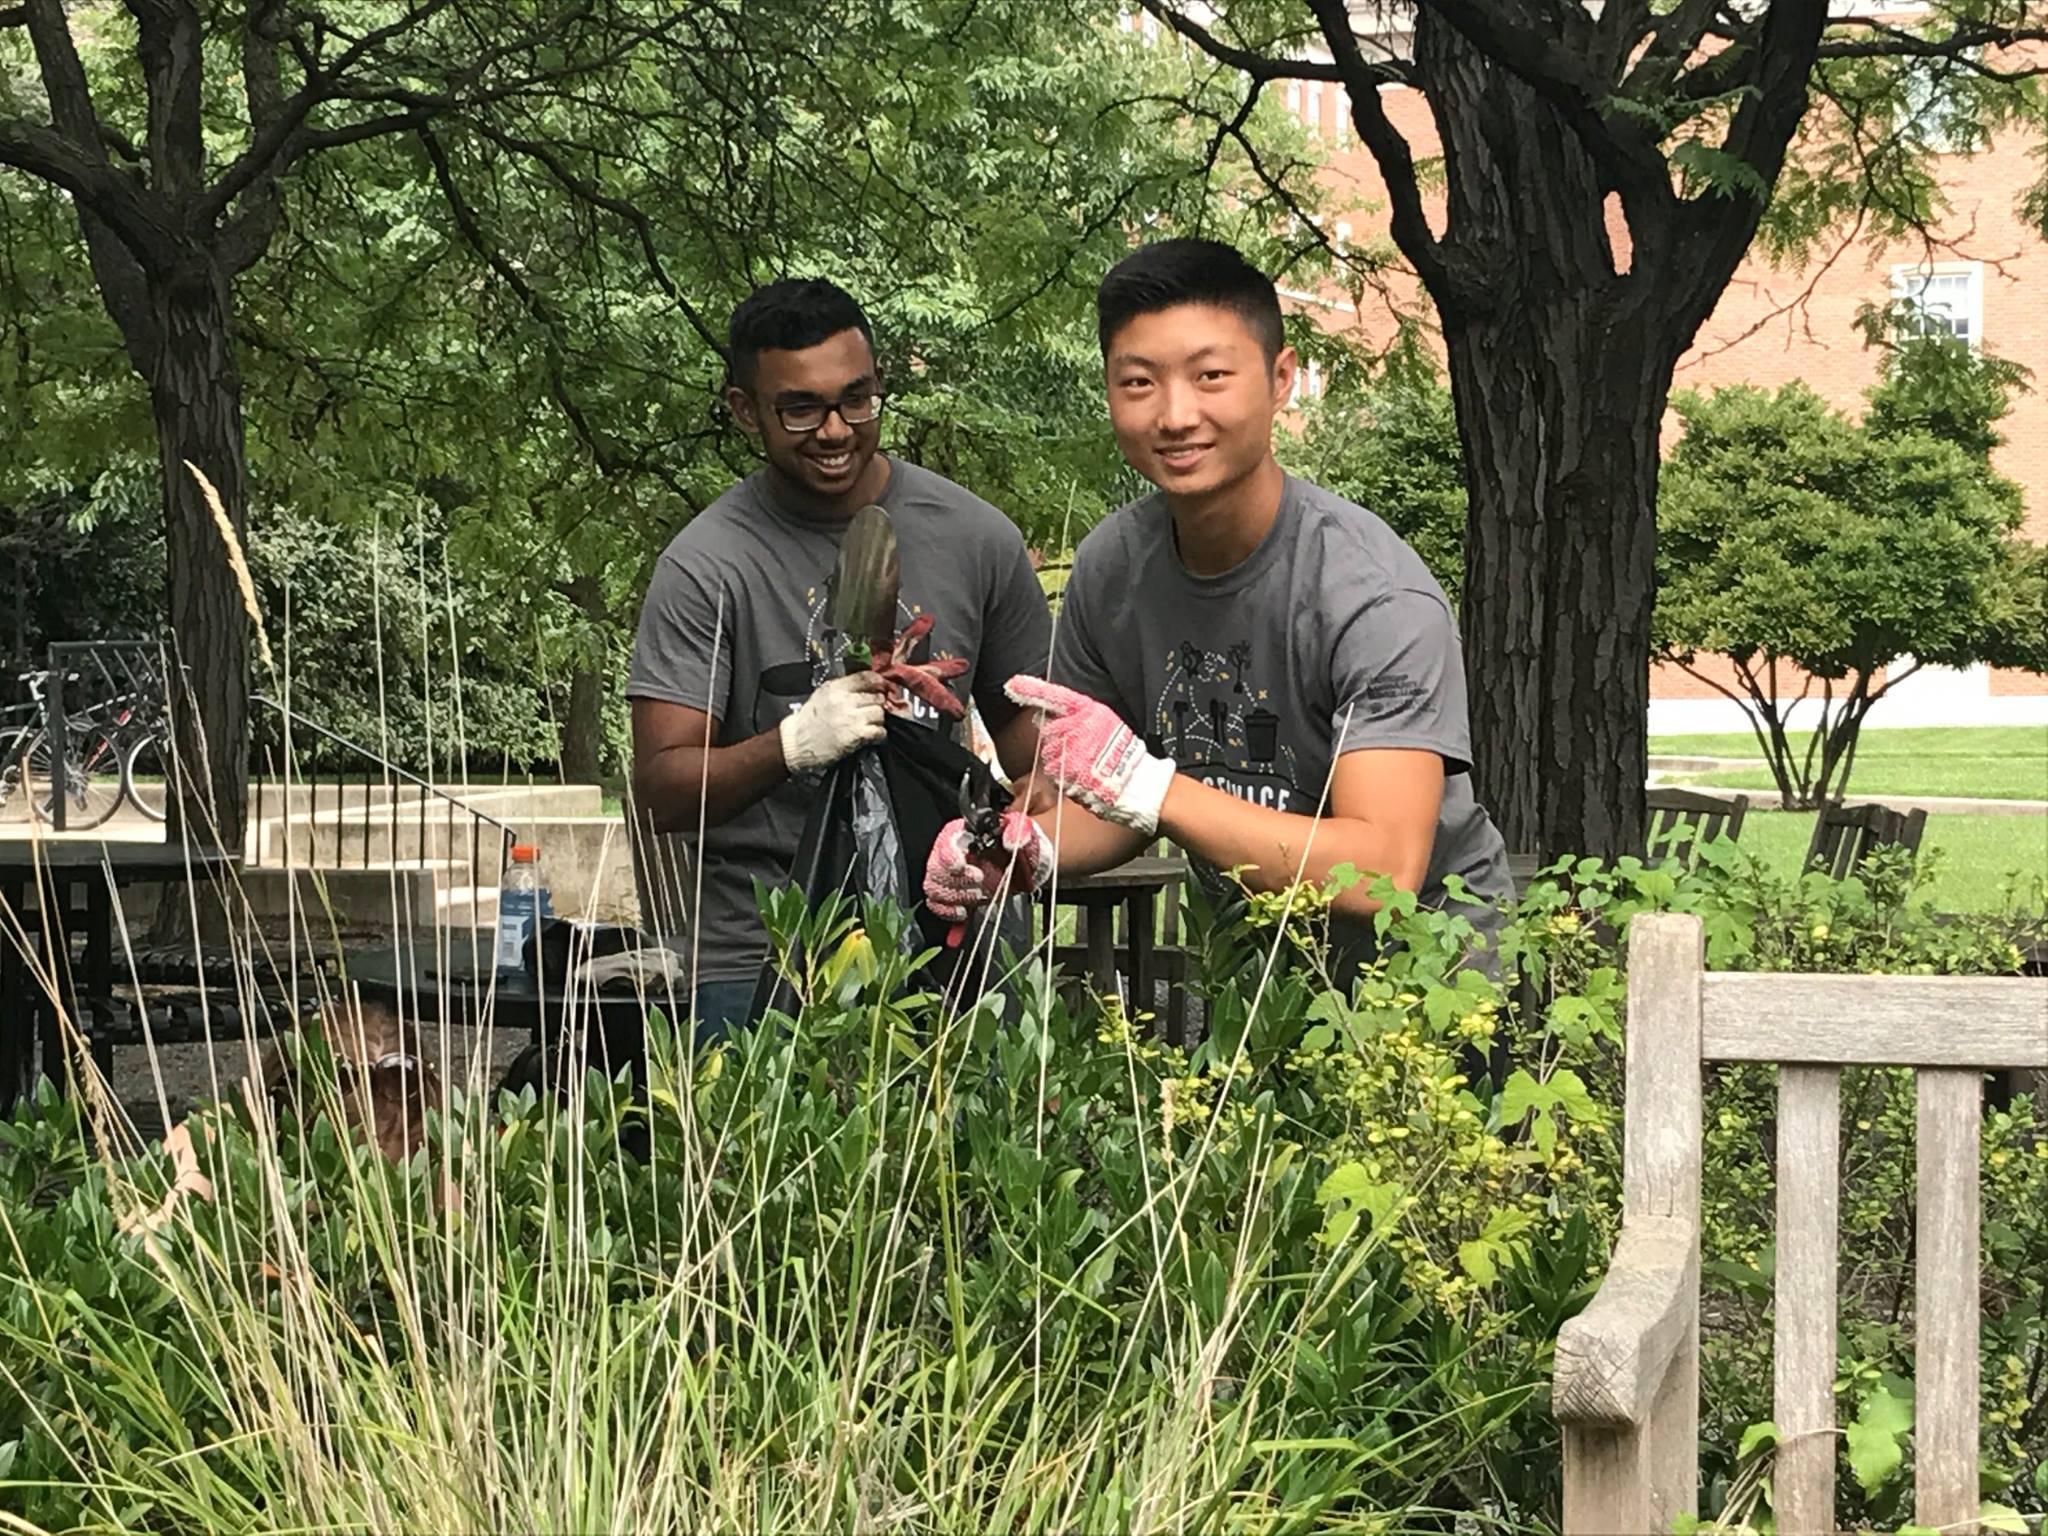 Students posing while working in a campus garden